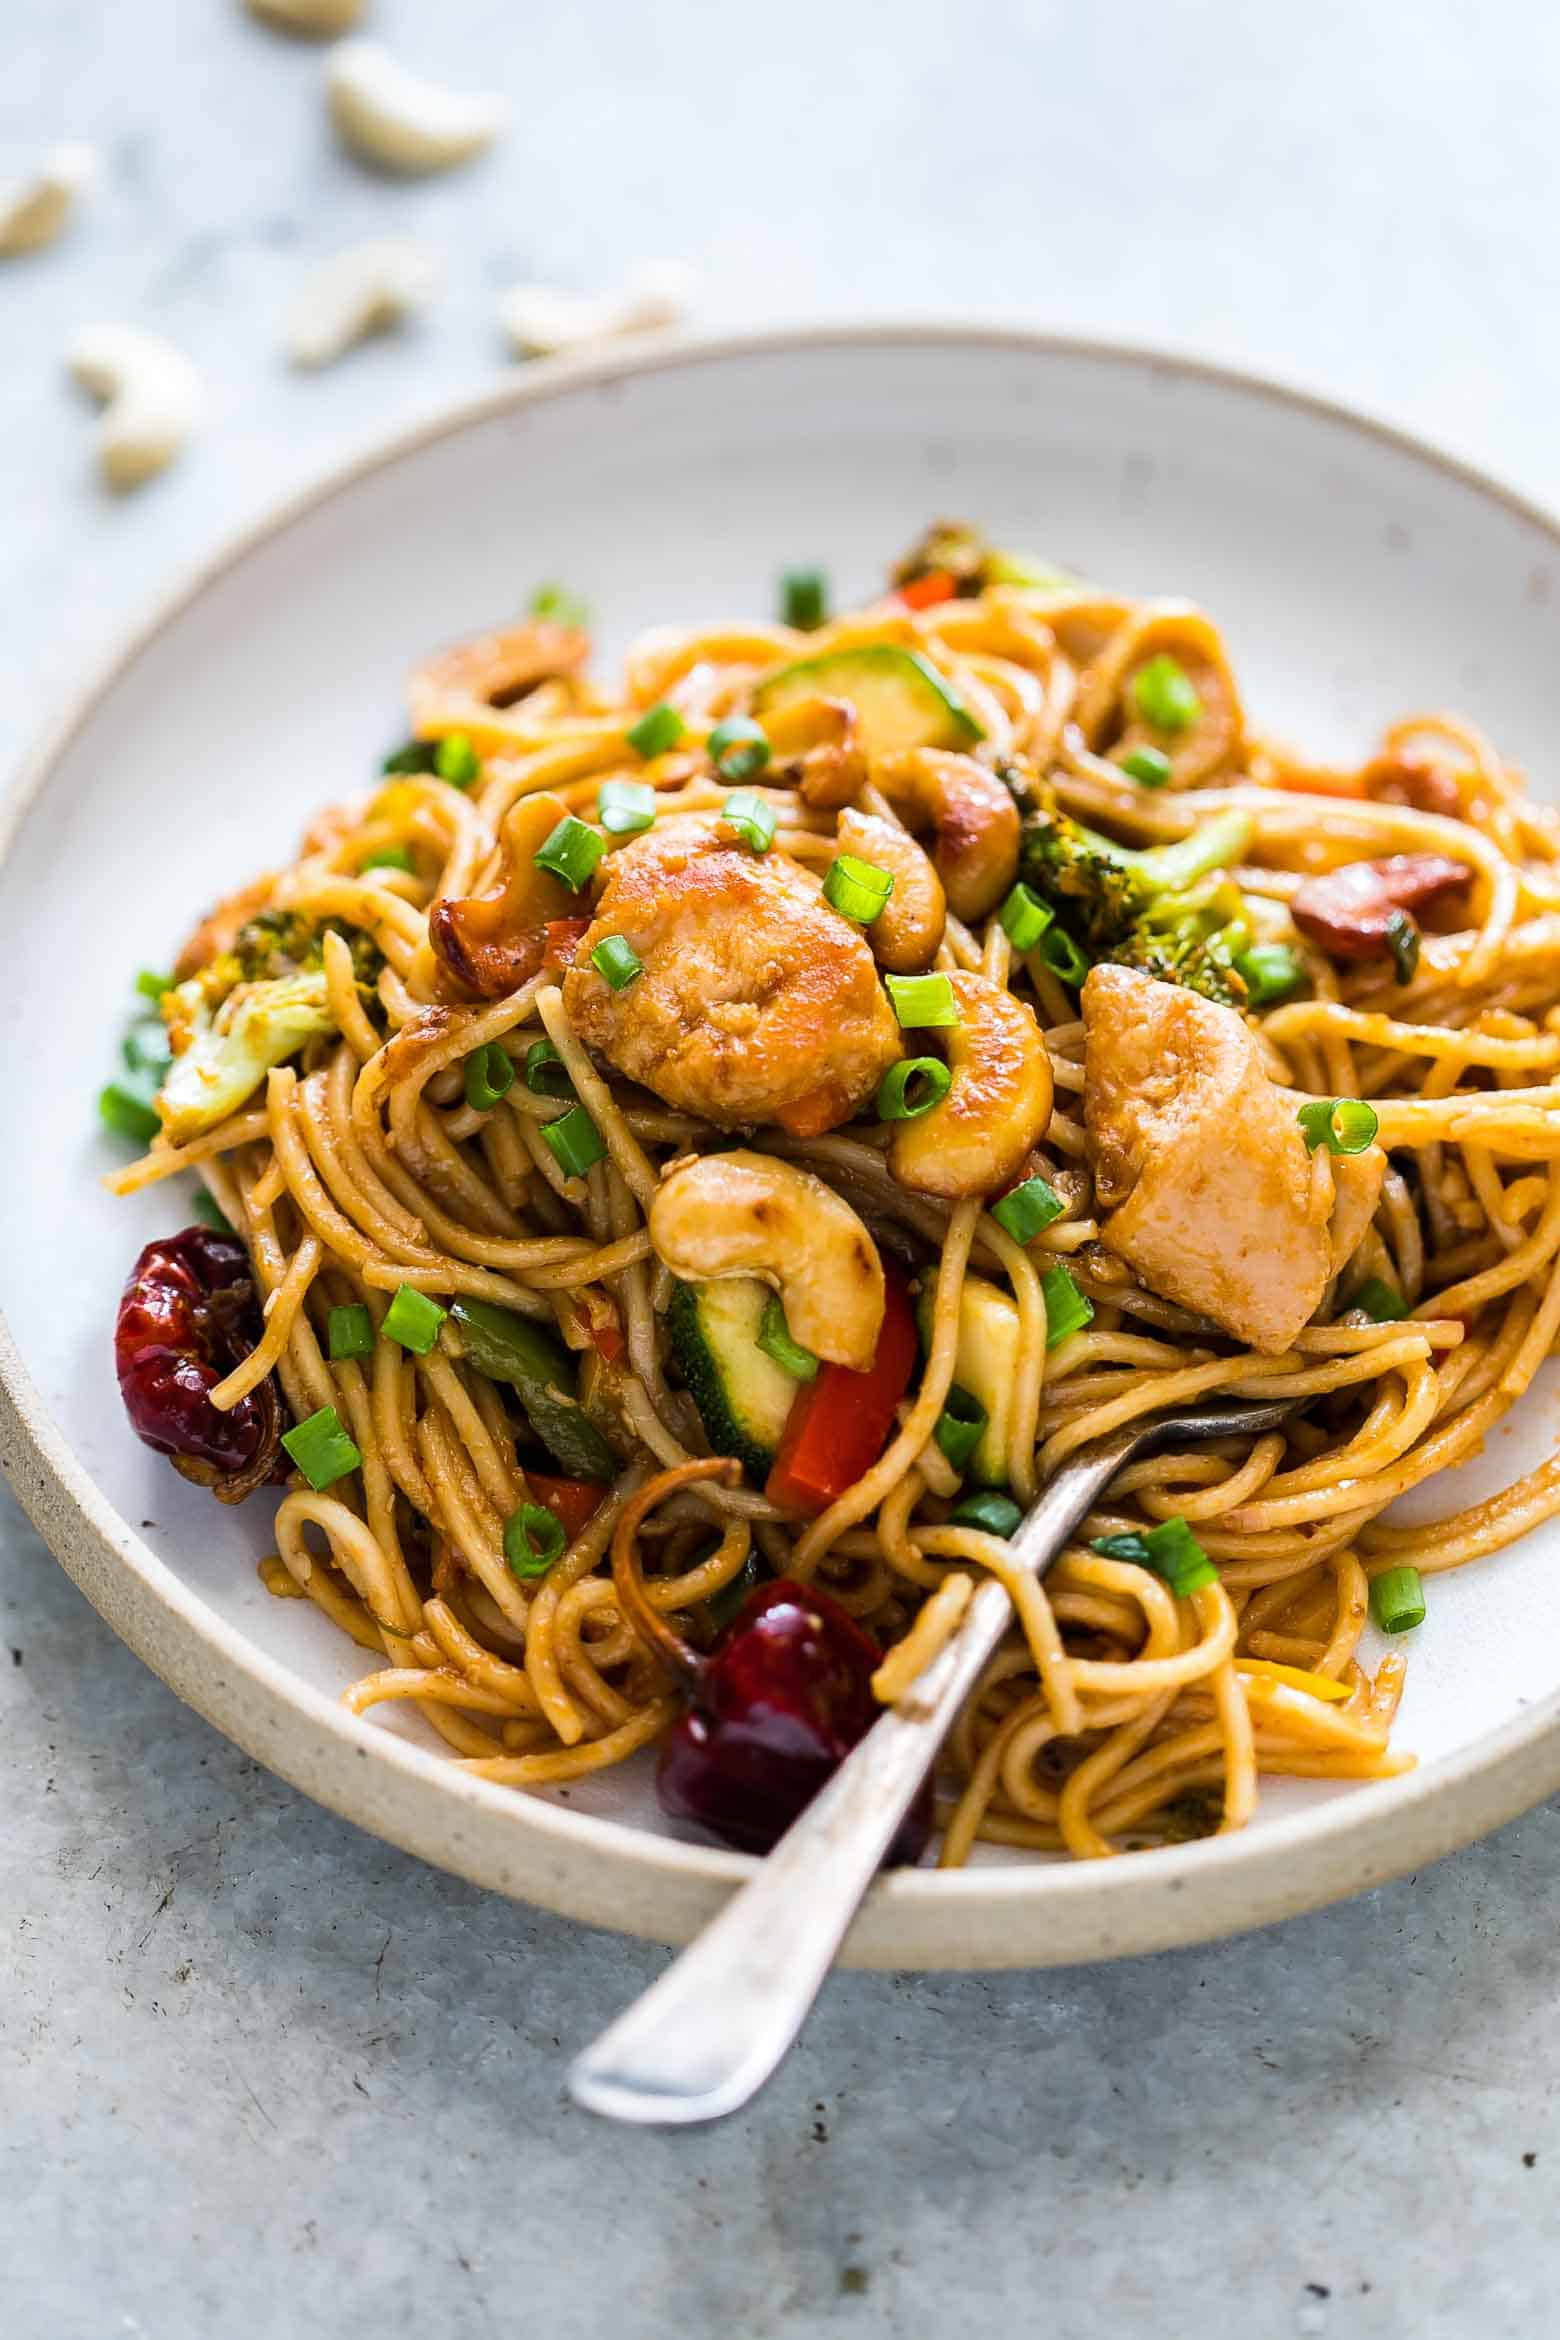 Top 22 Chicken Stir Fry with Noodles Recipe - Home, Family, Style and ...